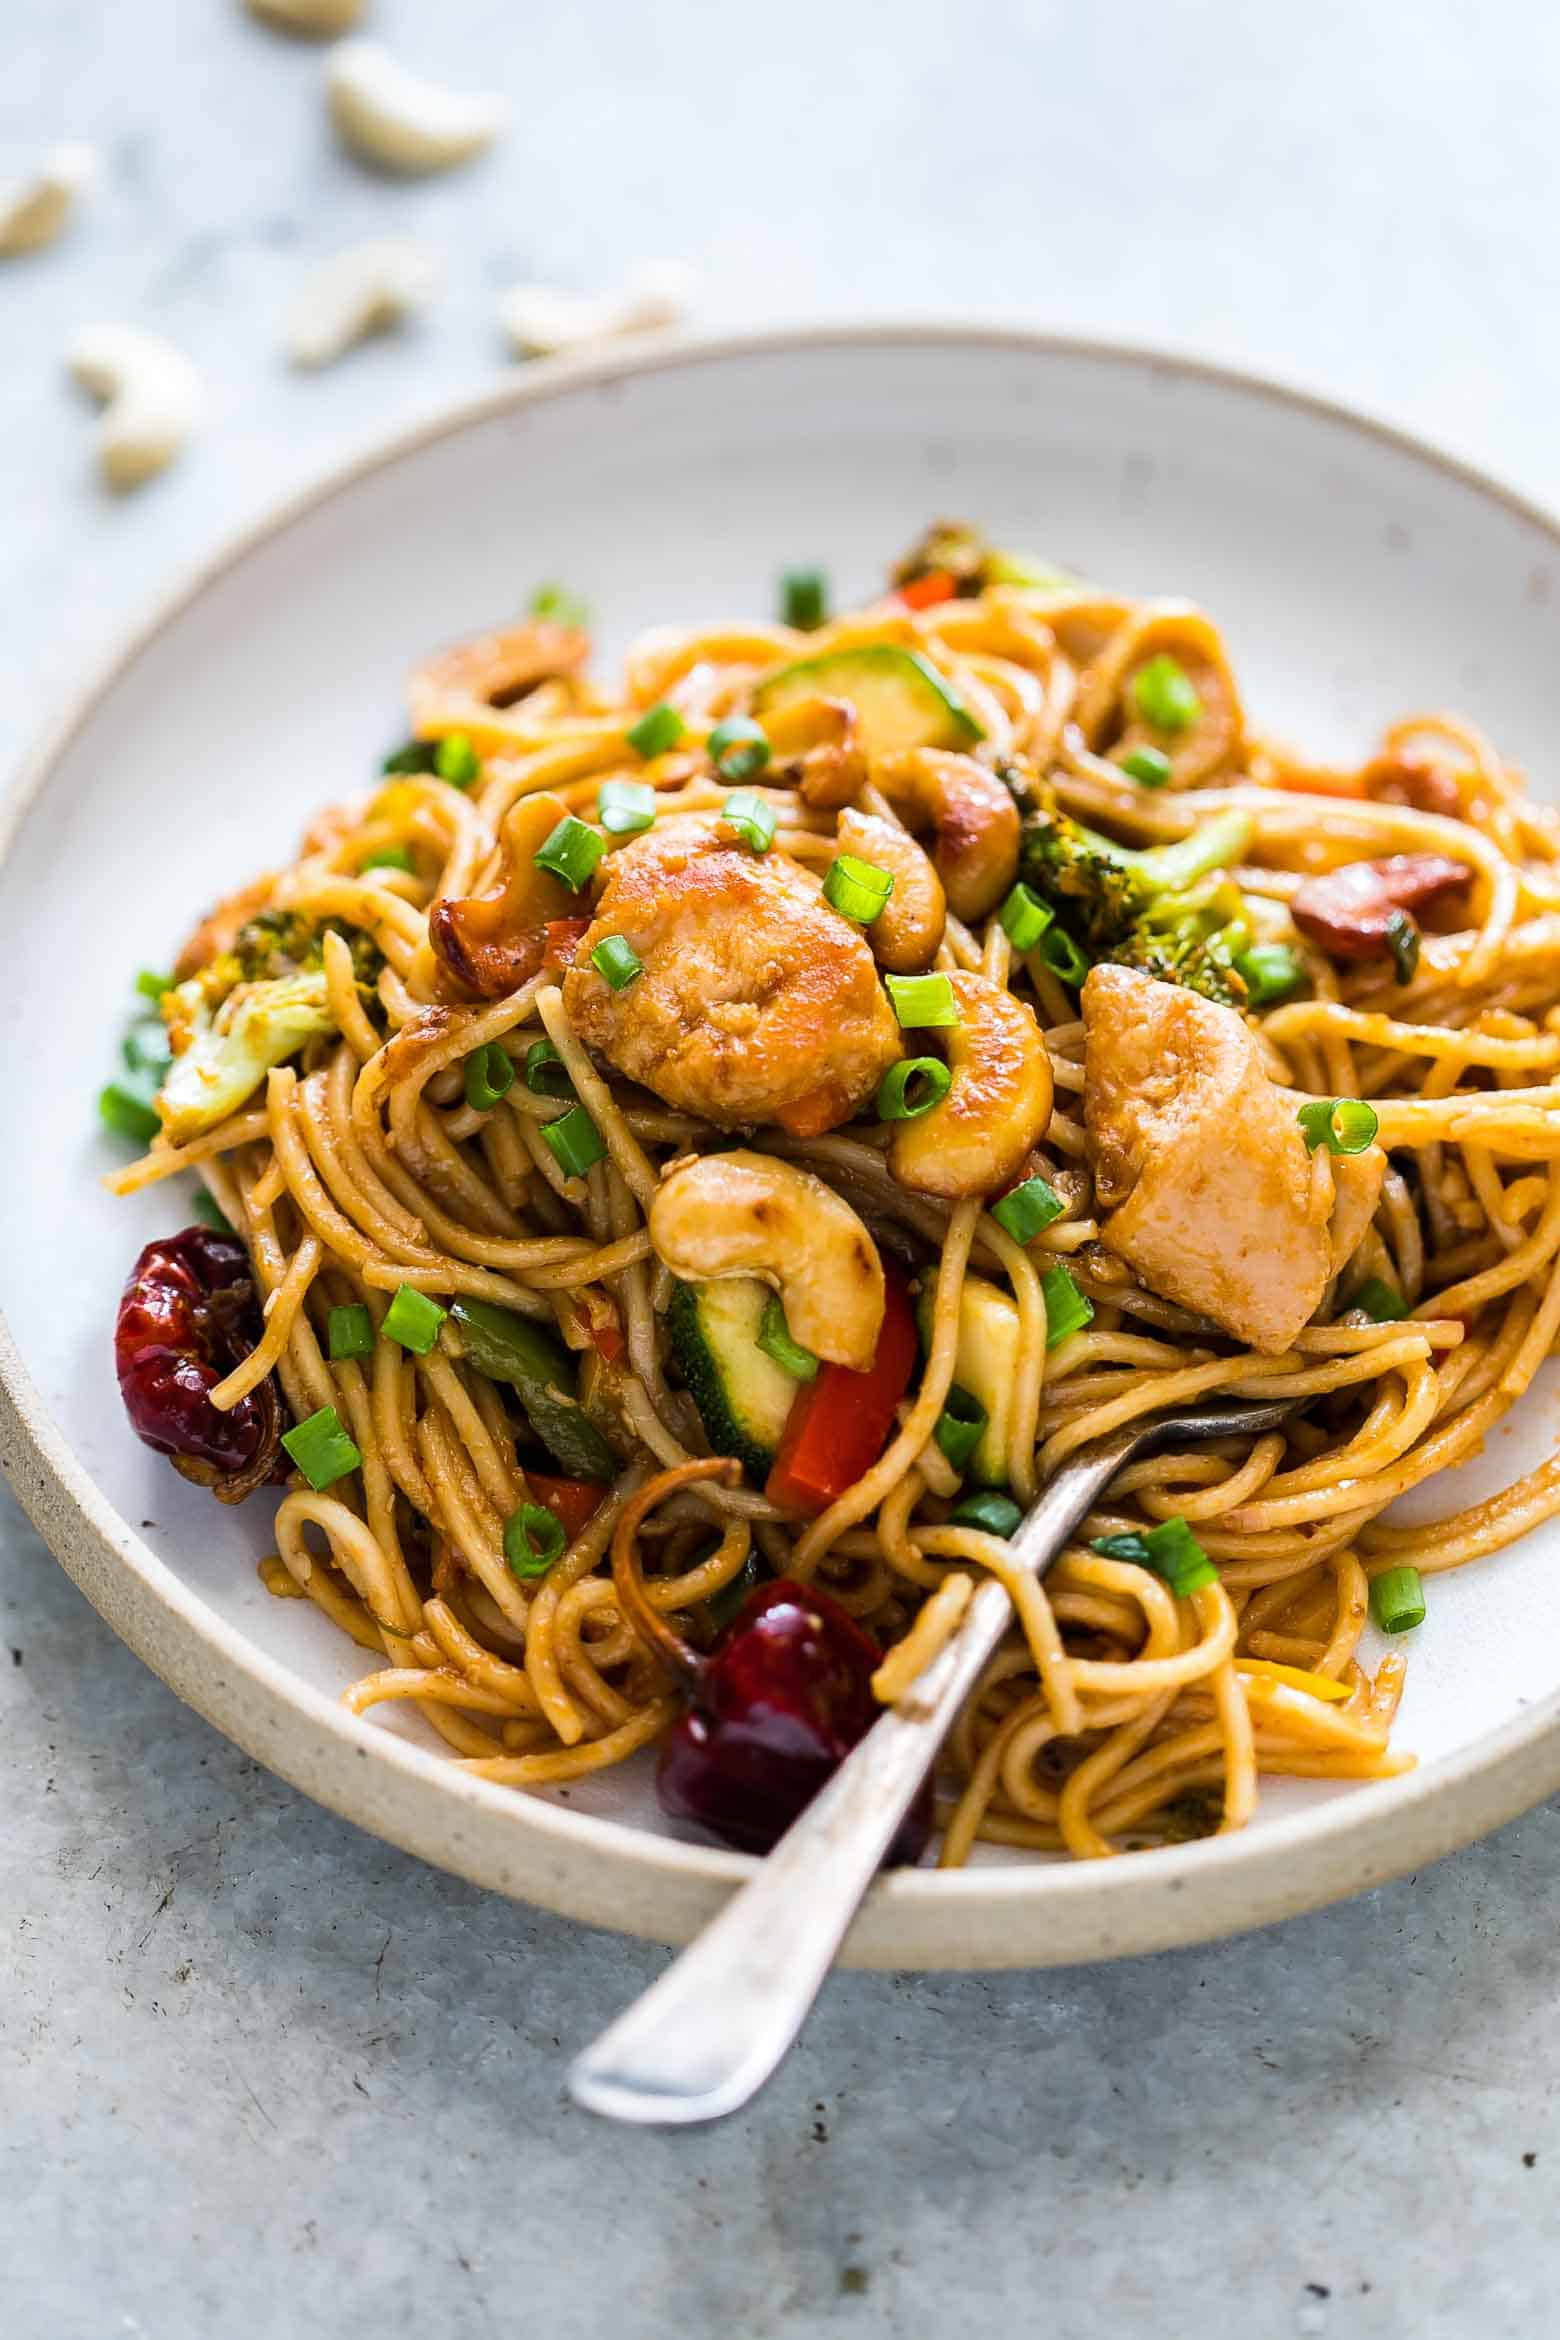 Top 22 Chicken Stir Fry with Noodles Recipe - Home, Family, Style and ...